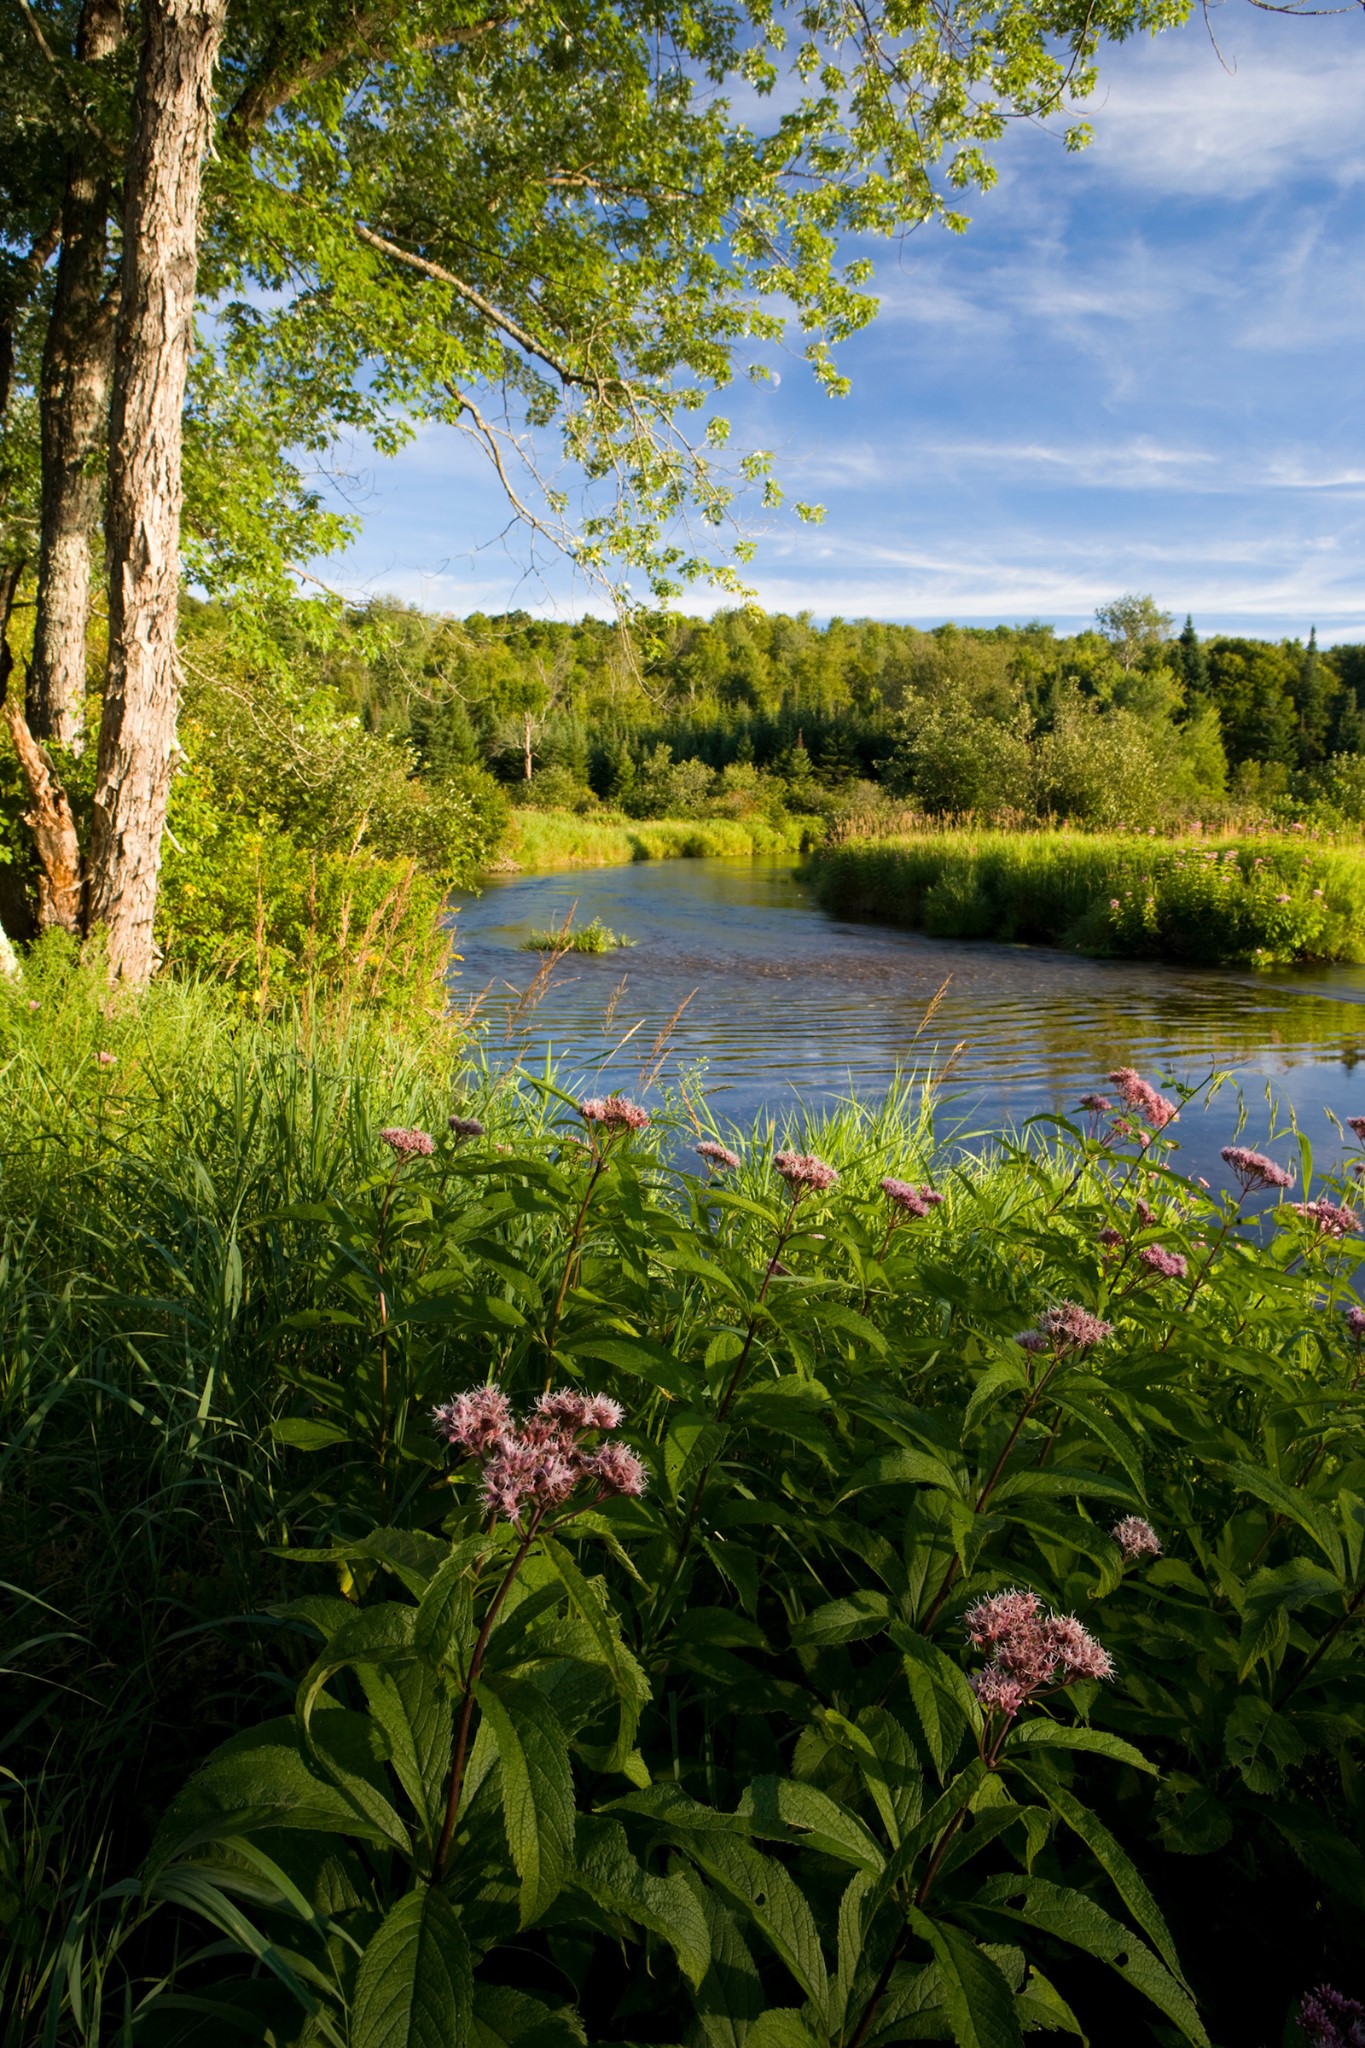 A river flows by a forest and pink wildflowers on the shore.